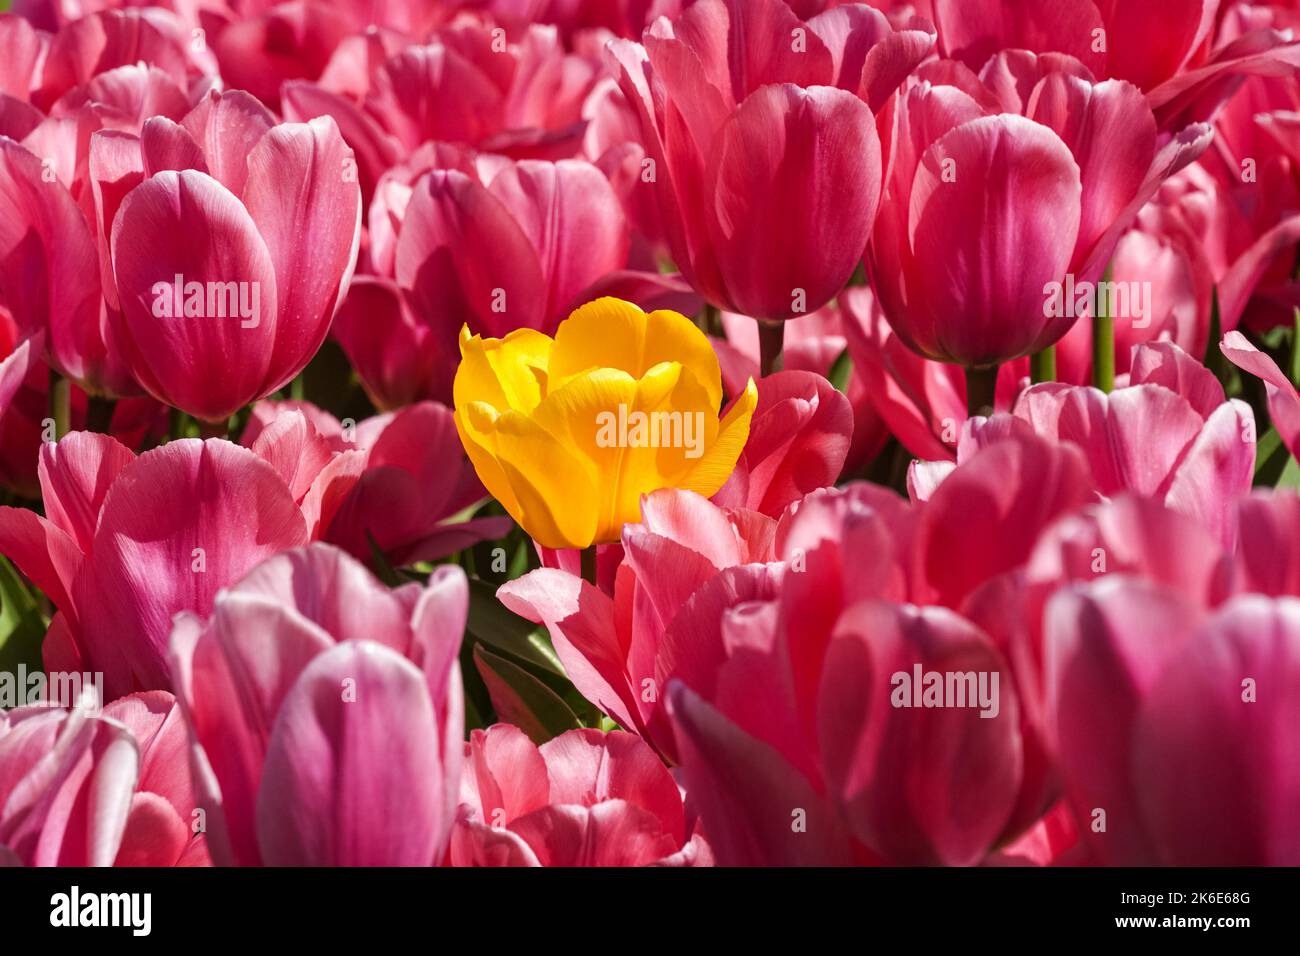 Blooming pink tulips with one yellow tulip inside Stock Photo